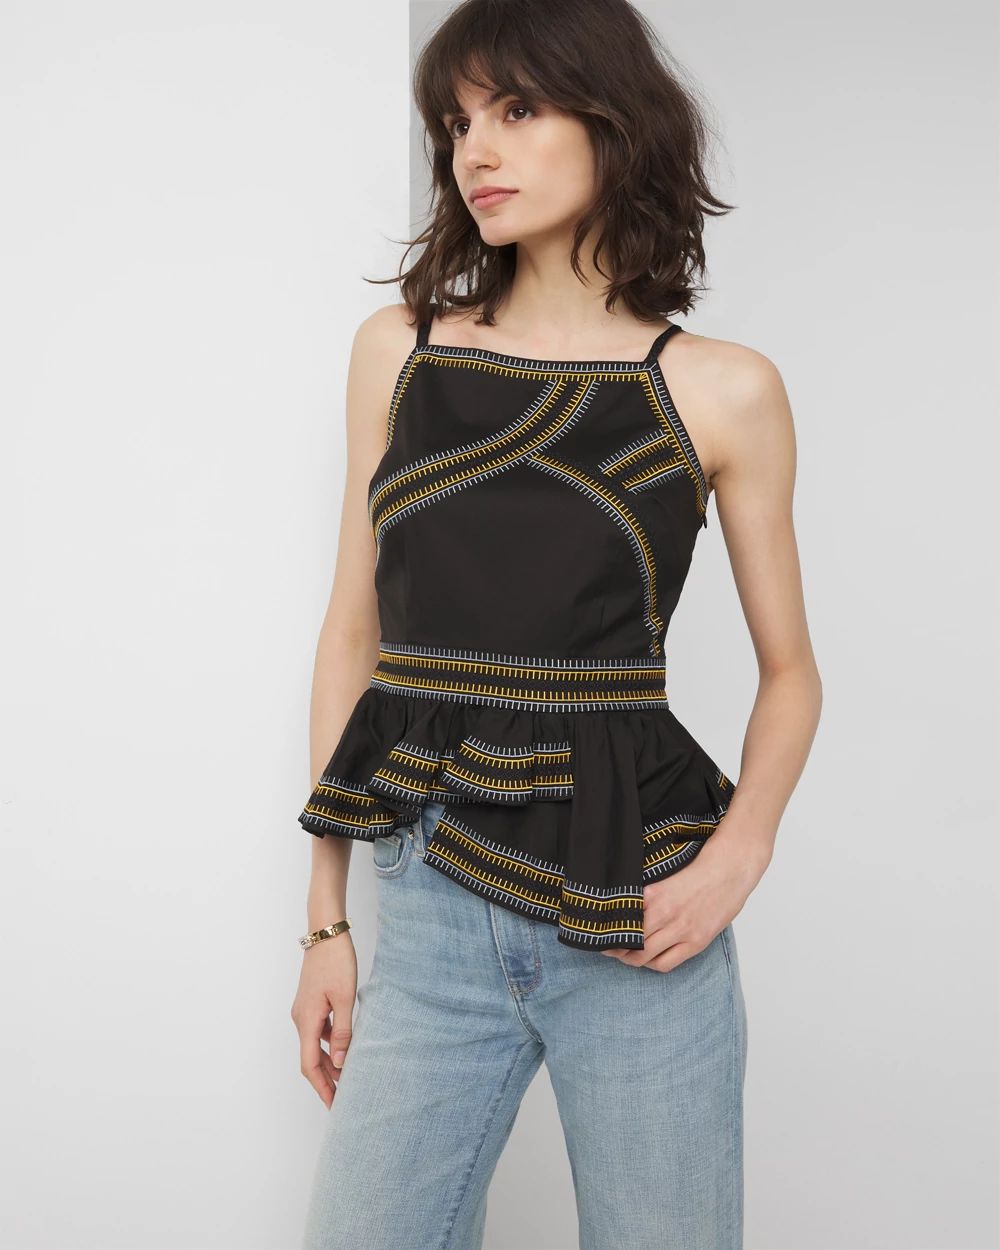 Sleeveless Embroidered Peplum Halter Top click to view larger image.